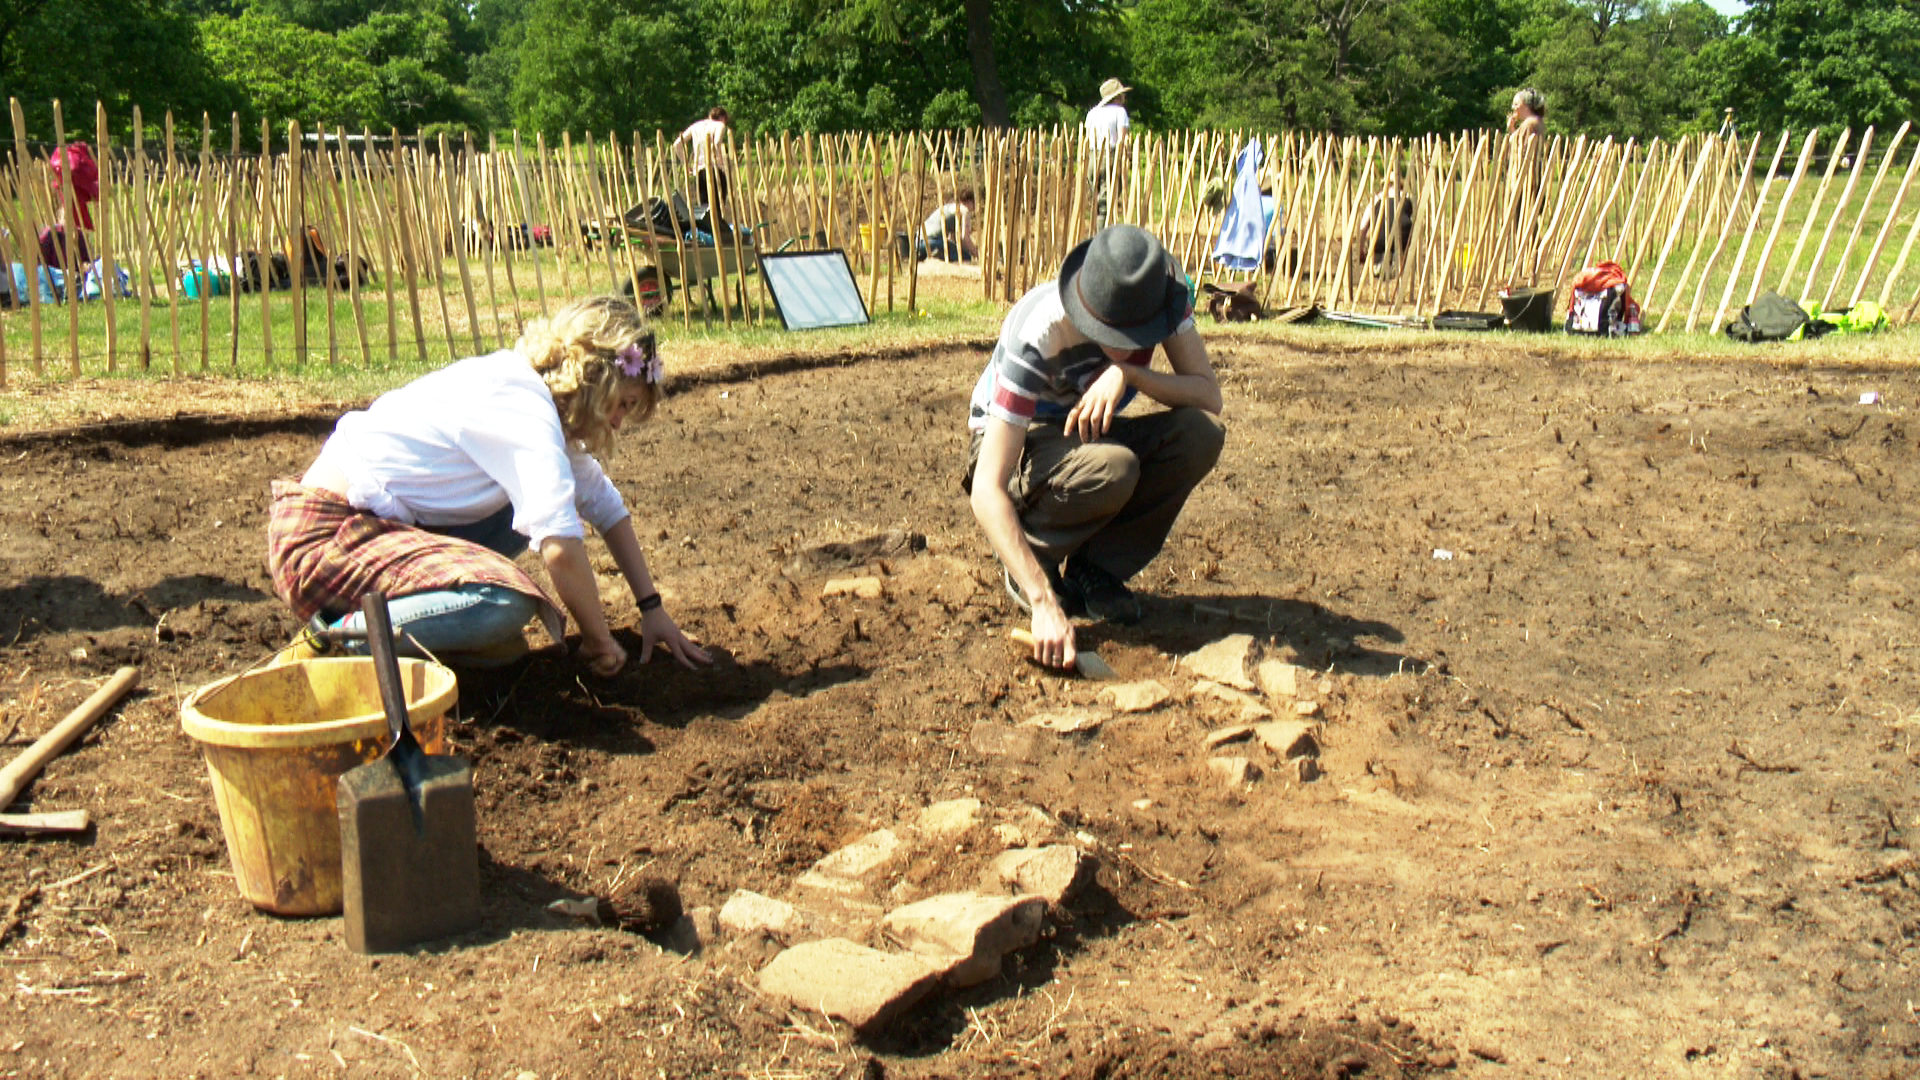 Students from the University of Leicester digging at Bradgate Park. Credit. Pukaar News